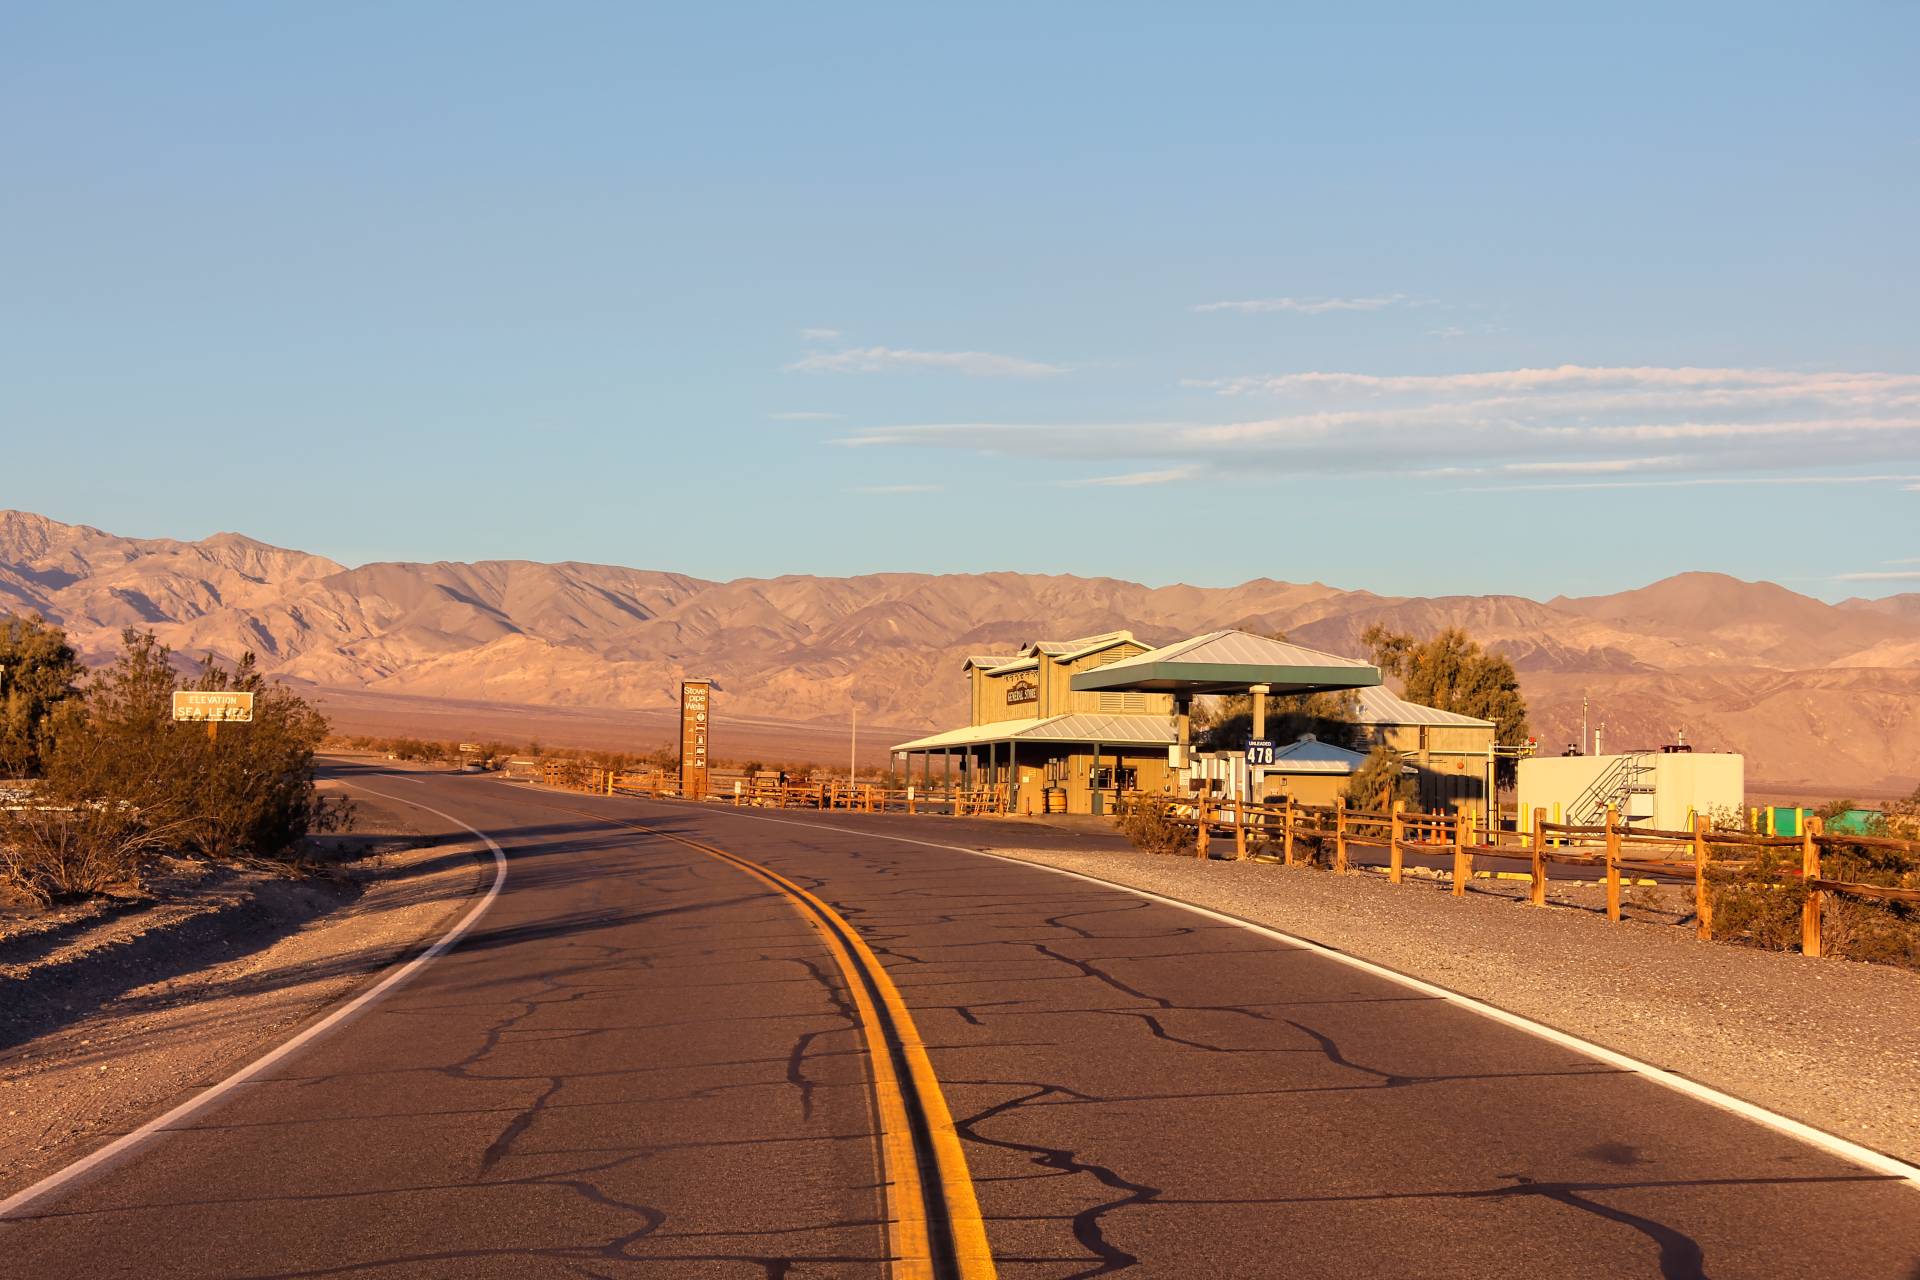 CA-190 in Stovepipe Wells, Death Valley National Park, California